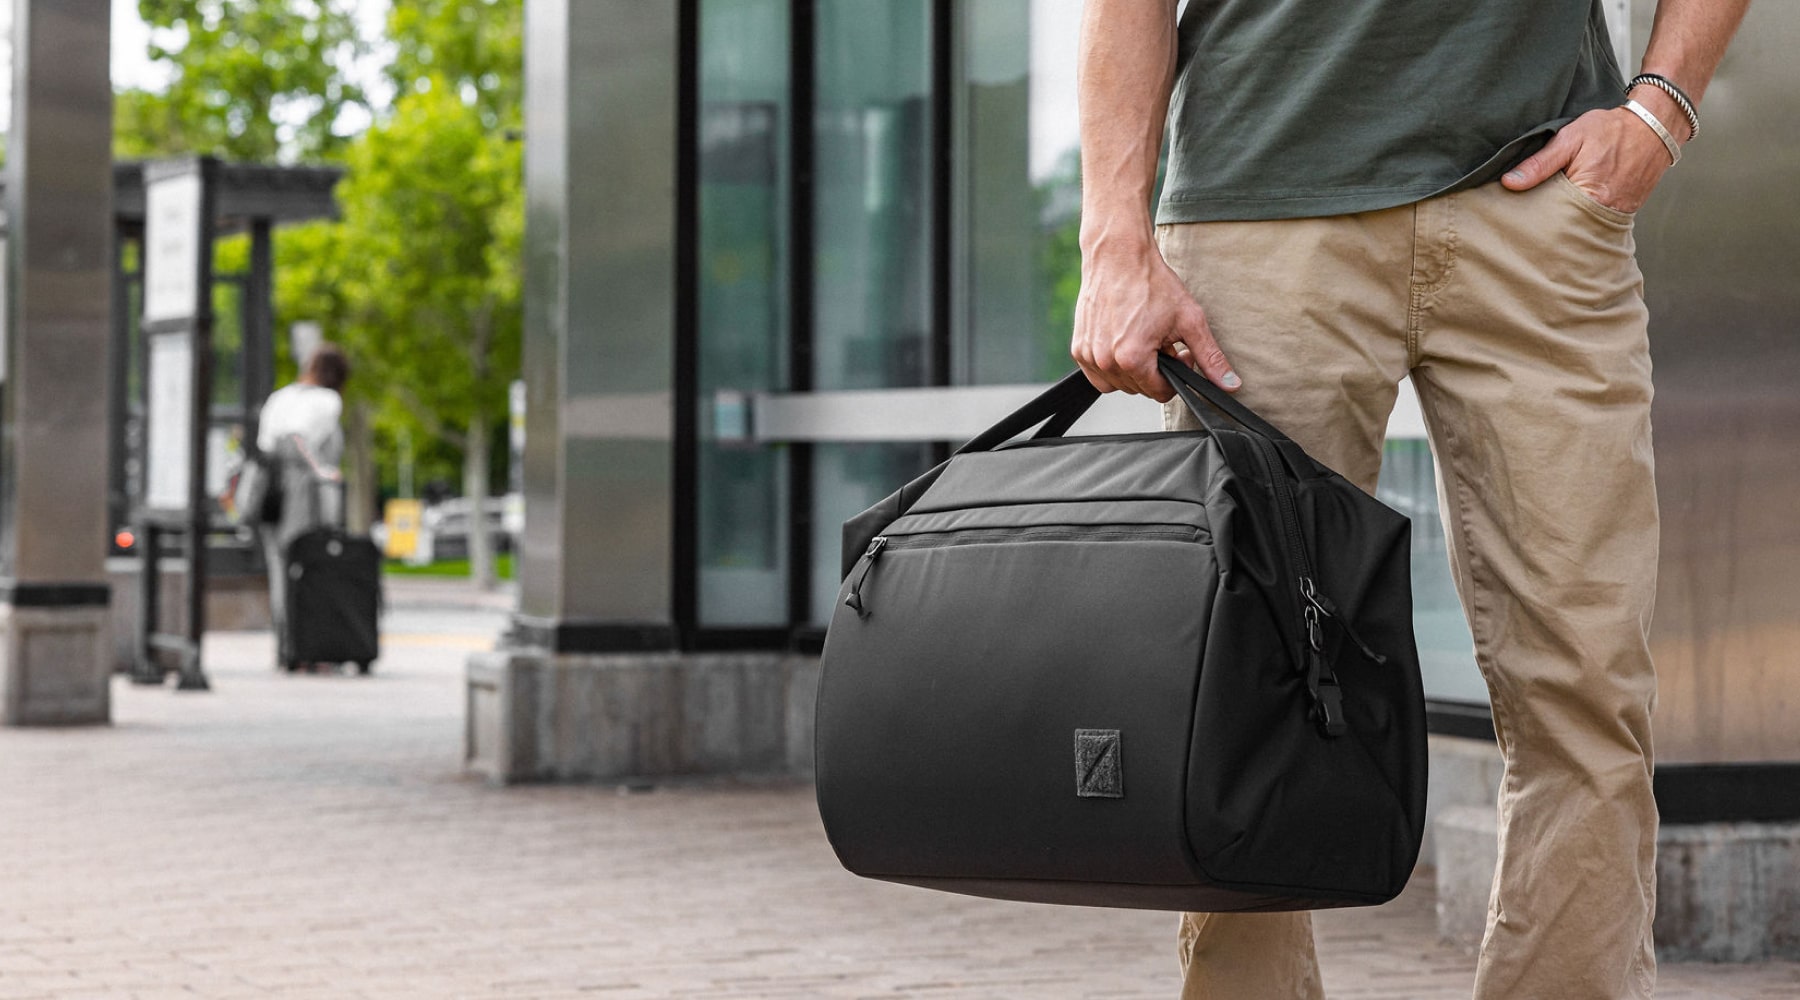 Transit Duffel 35L comes wrapped in foam protection